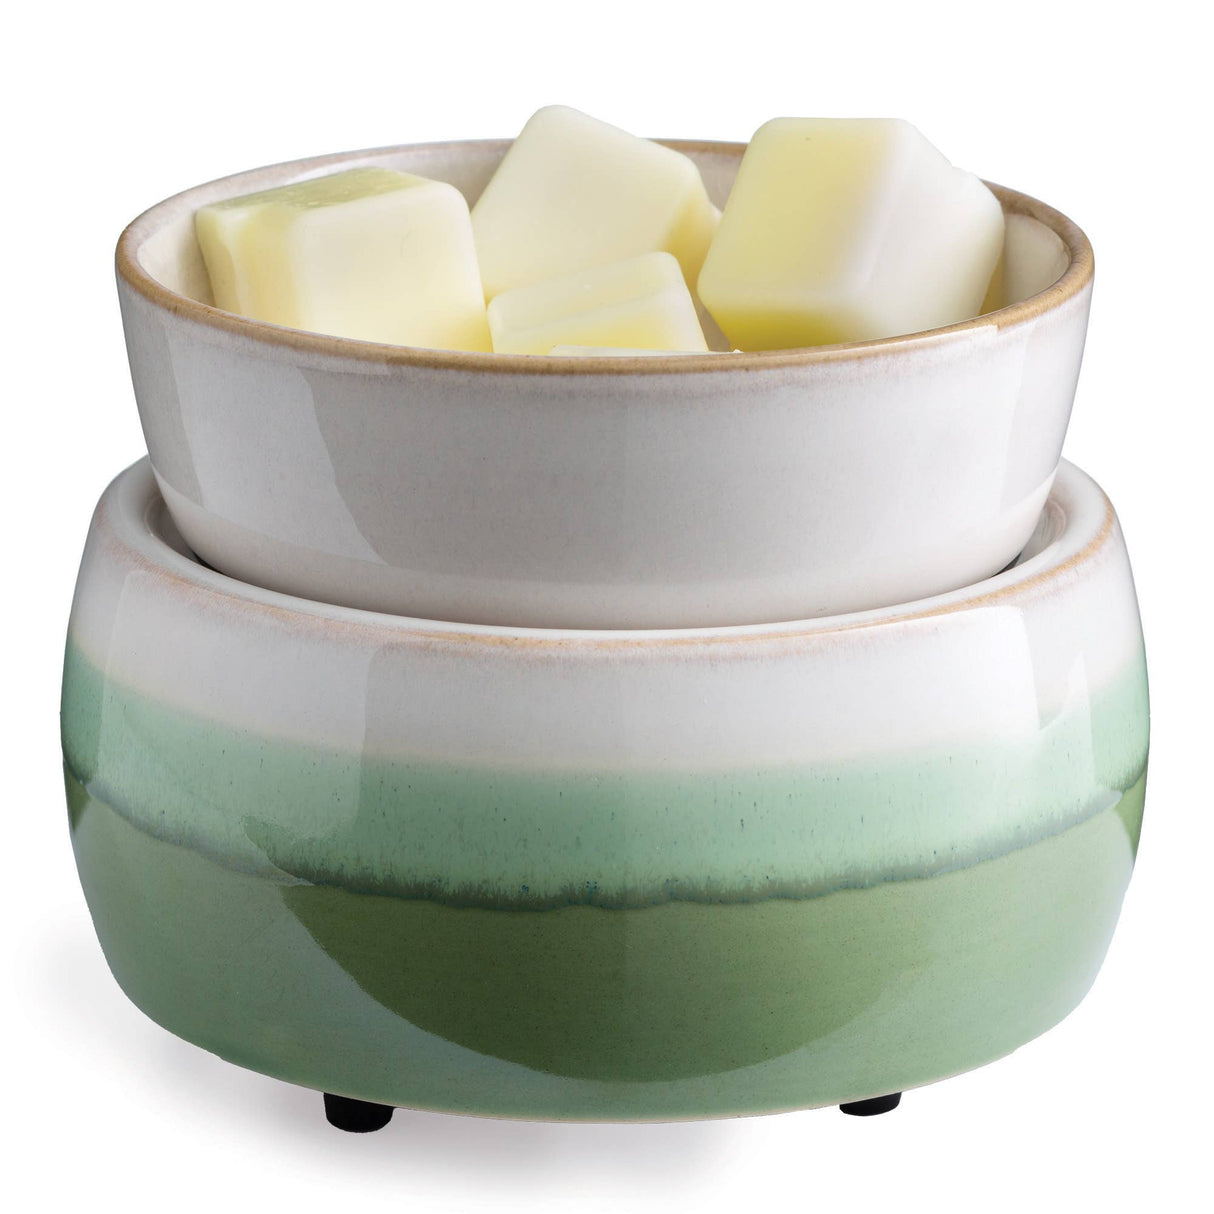 Matcha 2-in-1 Fragrance Warmers